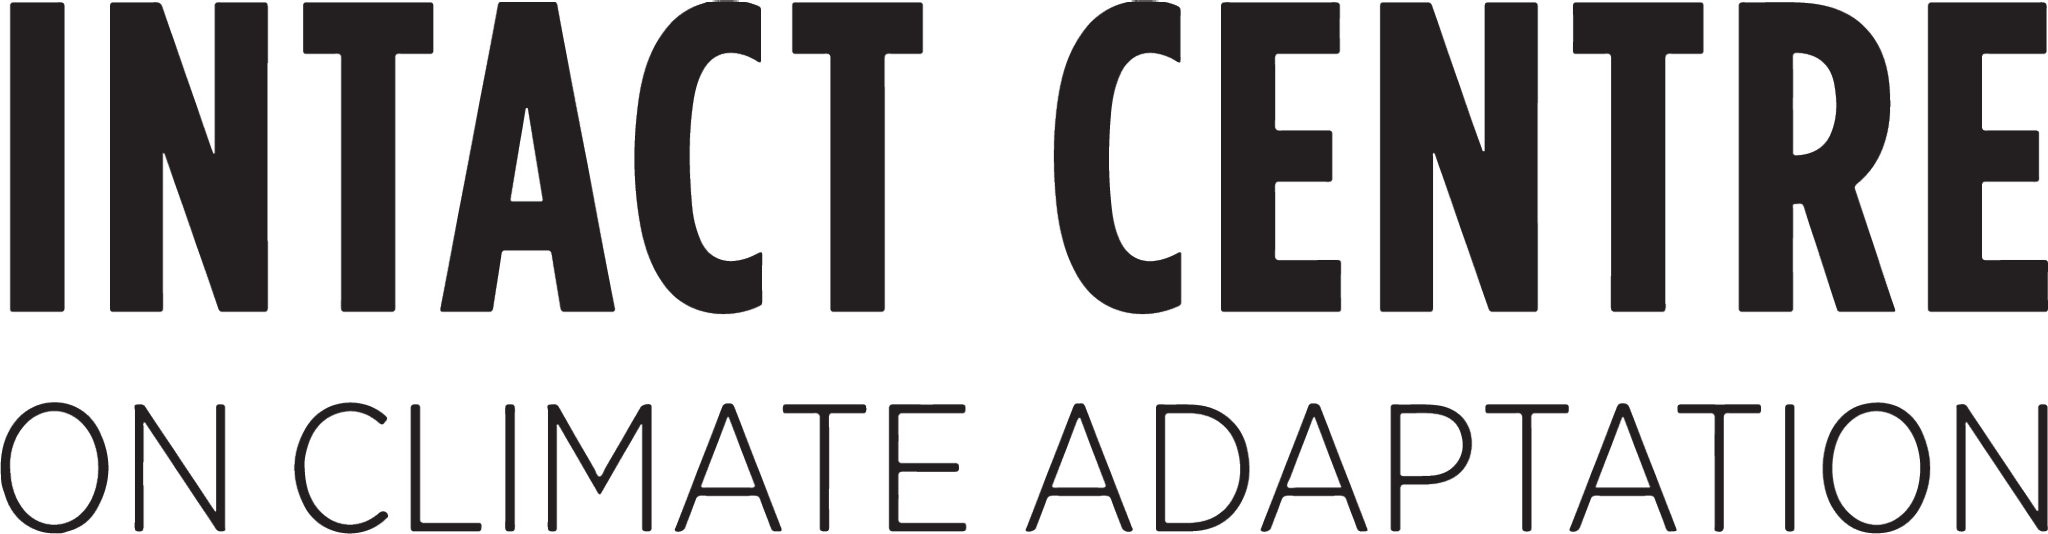 Logo for the Intact Centre on Climate Adaptation